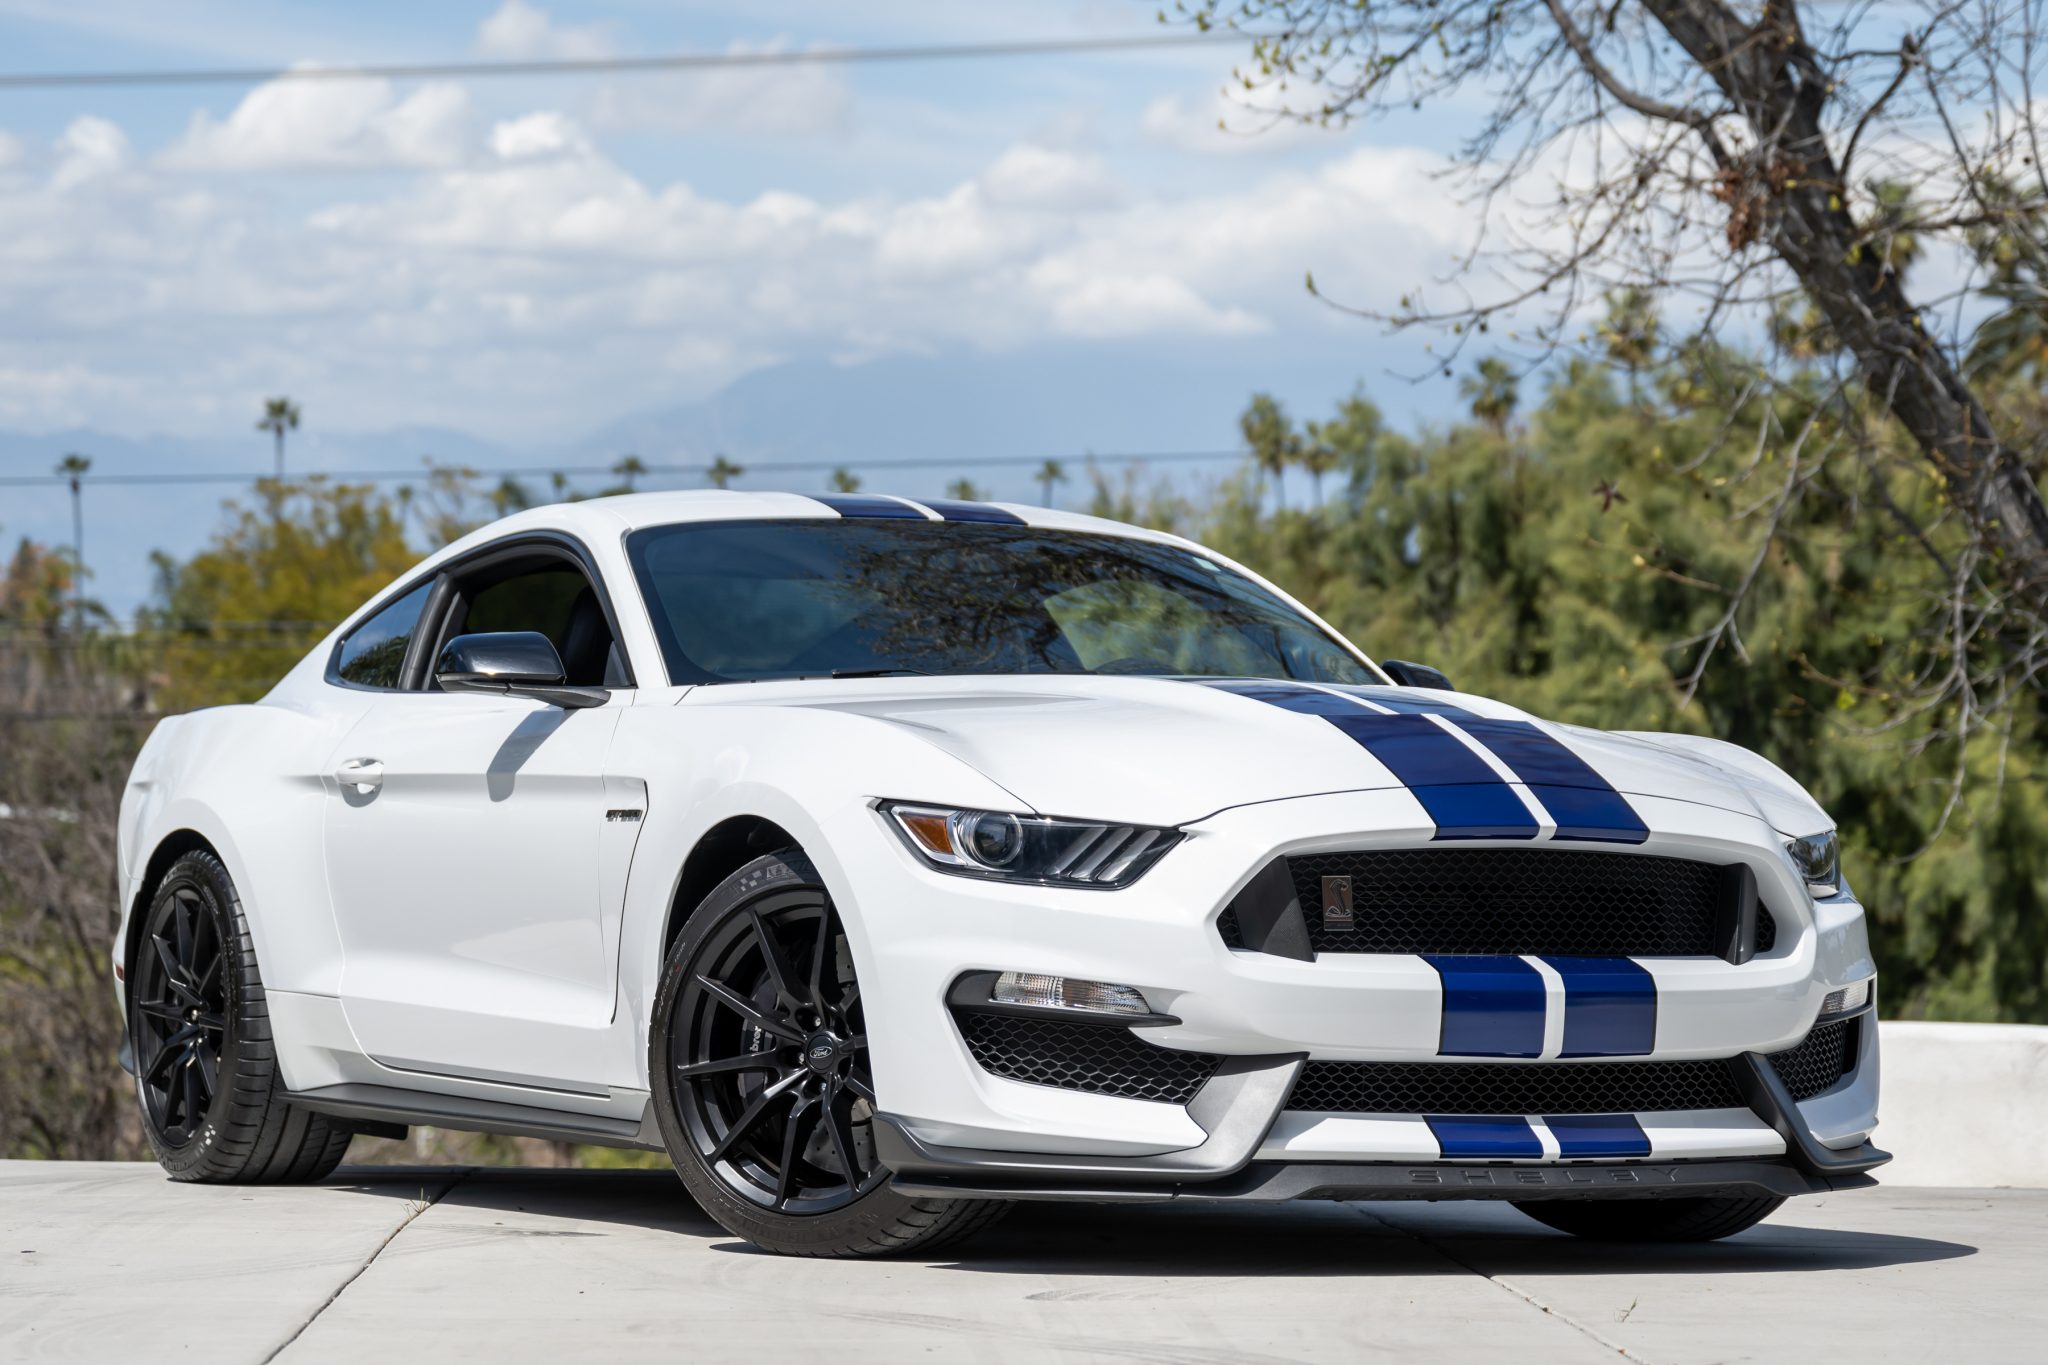 Used 6k-Mile 2016 Ford Mustang Shelby GT350 Review